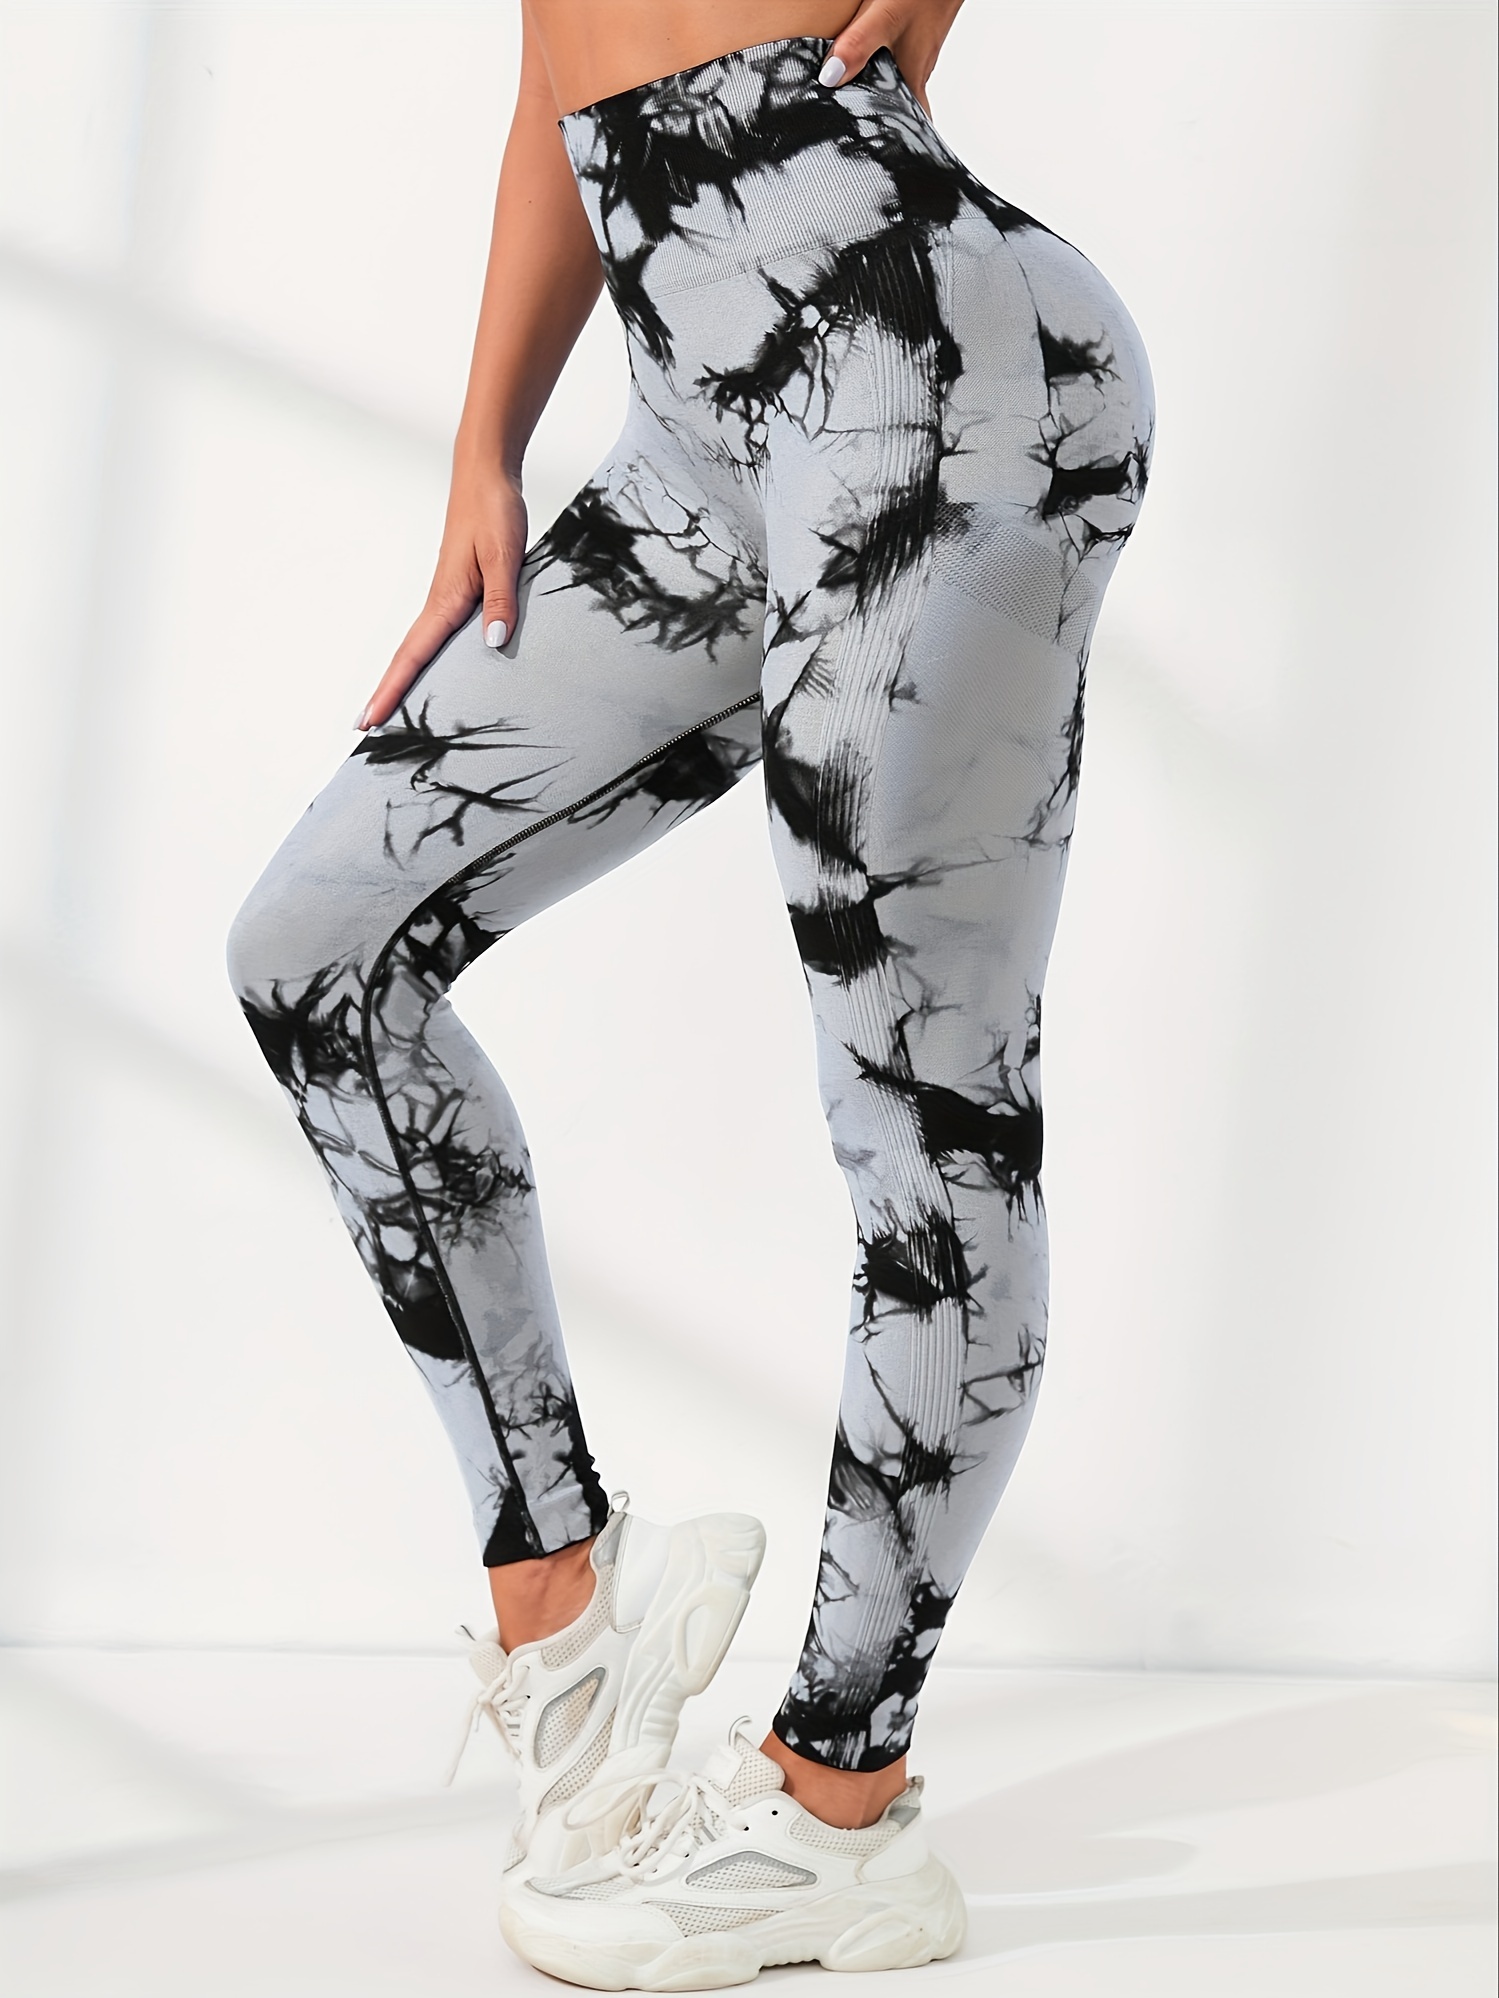 Black Camo Leggings for Women Womens Black Leggings With Camouflage Print Non  See Through Squat Approved Perfect for Yoga, Gym, Running -  Canada